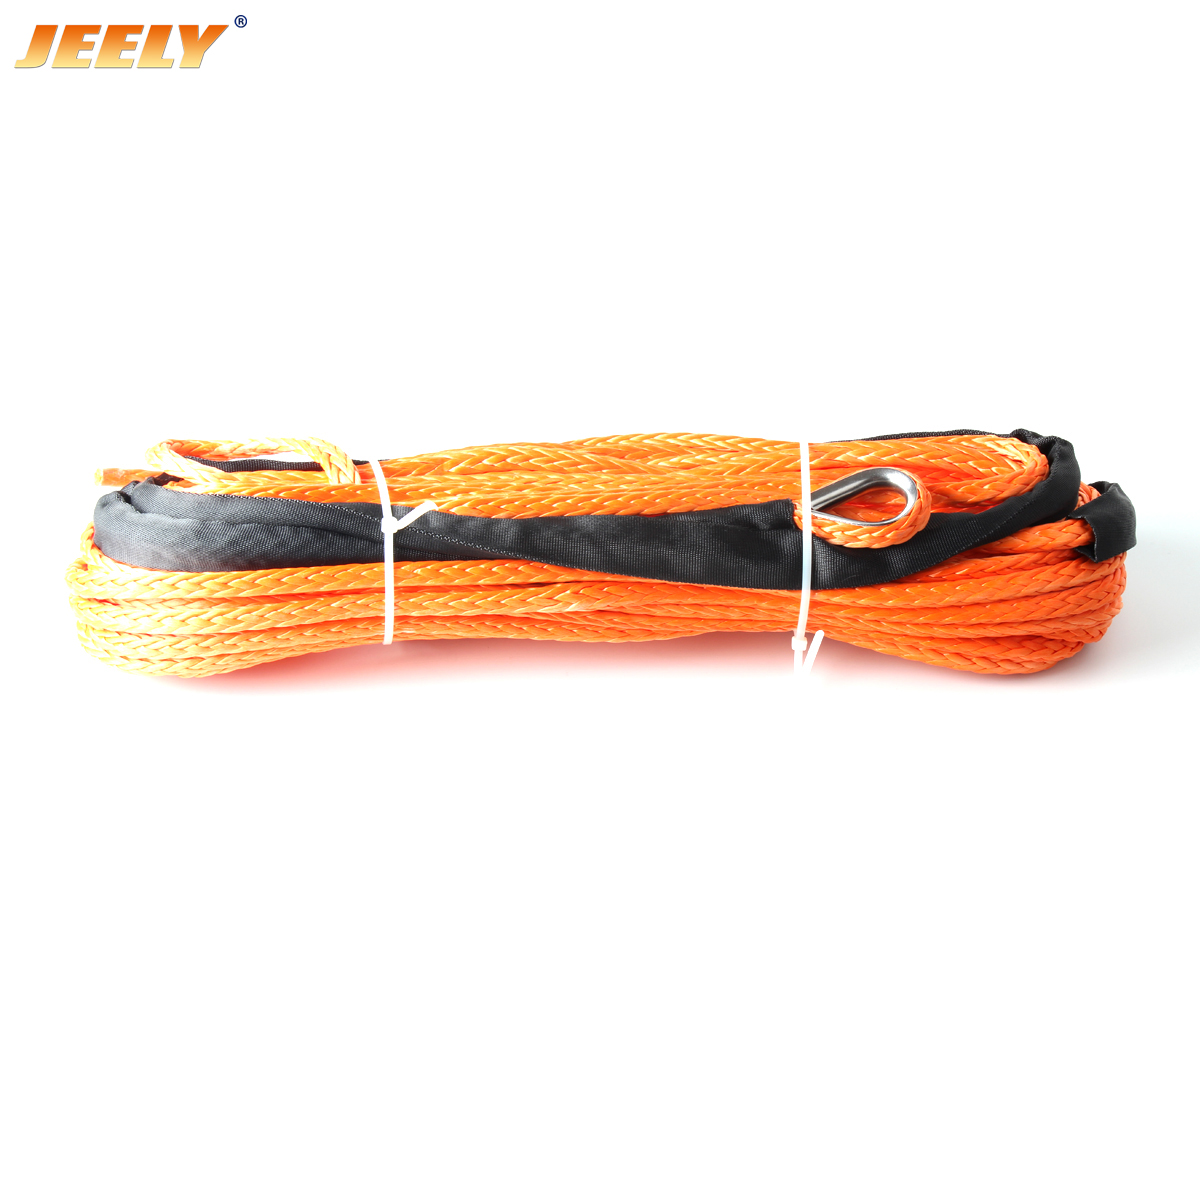 10mm*45m UHMWPE Winch Rope with Thimble Synthetic Cord for Off-road ATV/UTV/SUV/4X4/4WD